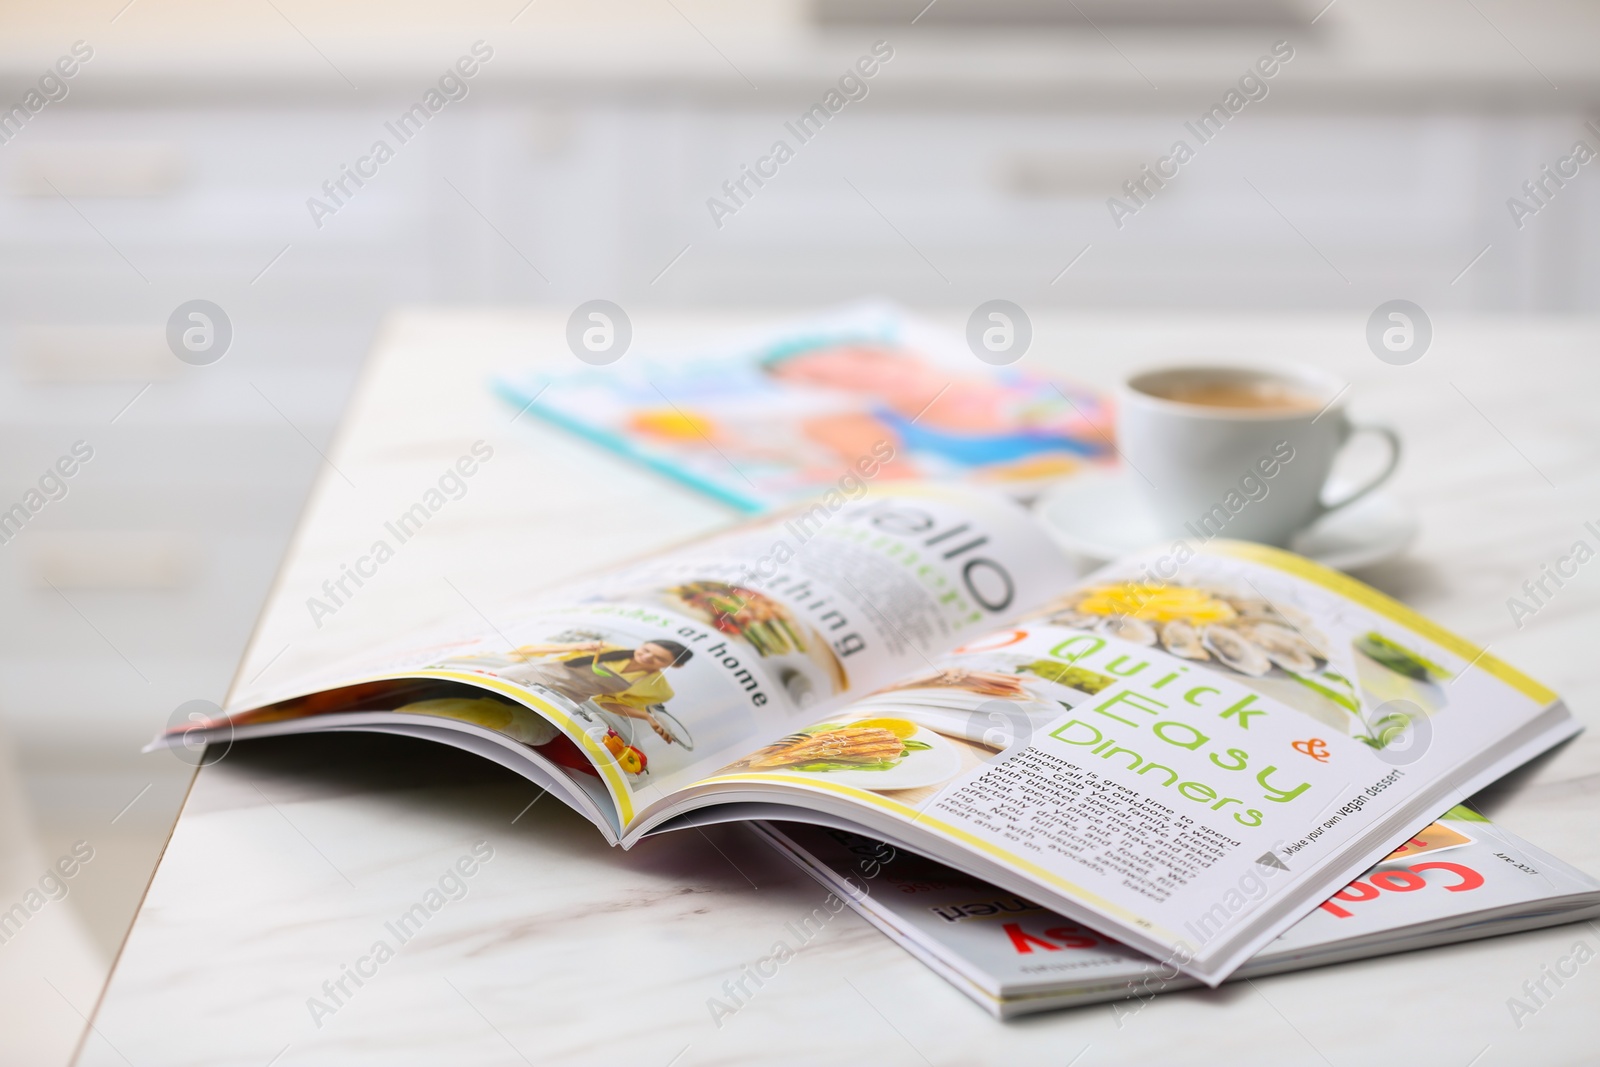 Photo of Culinary magazines and cup of coffee on table in kitchen